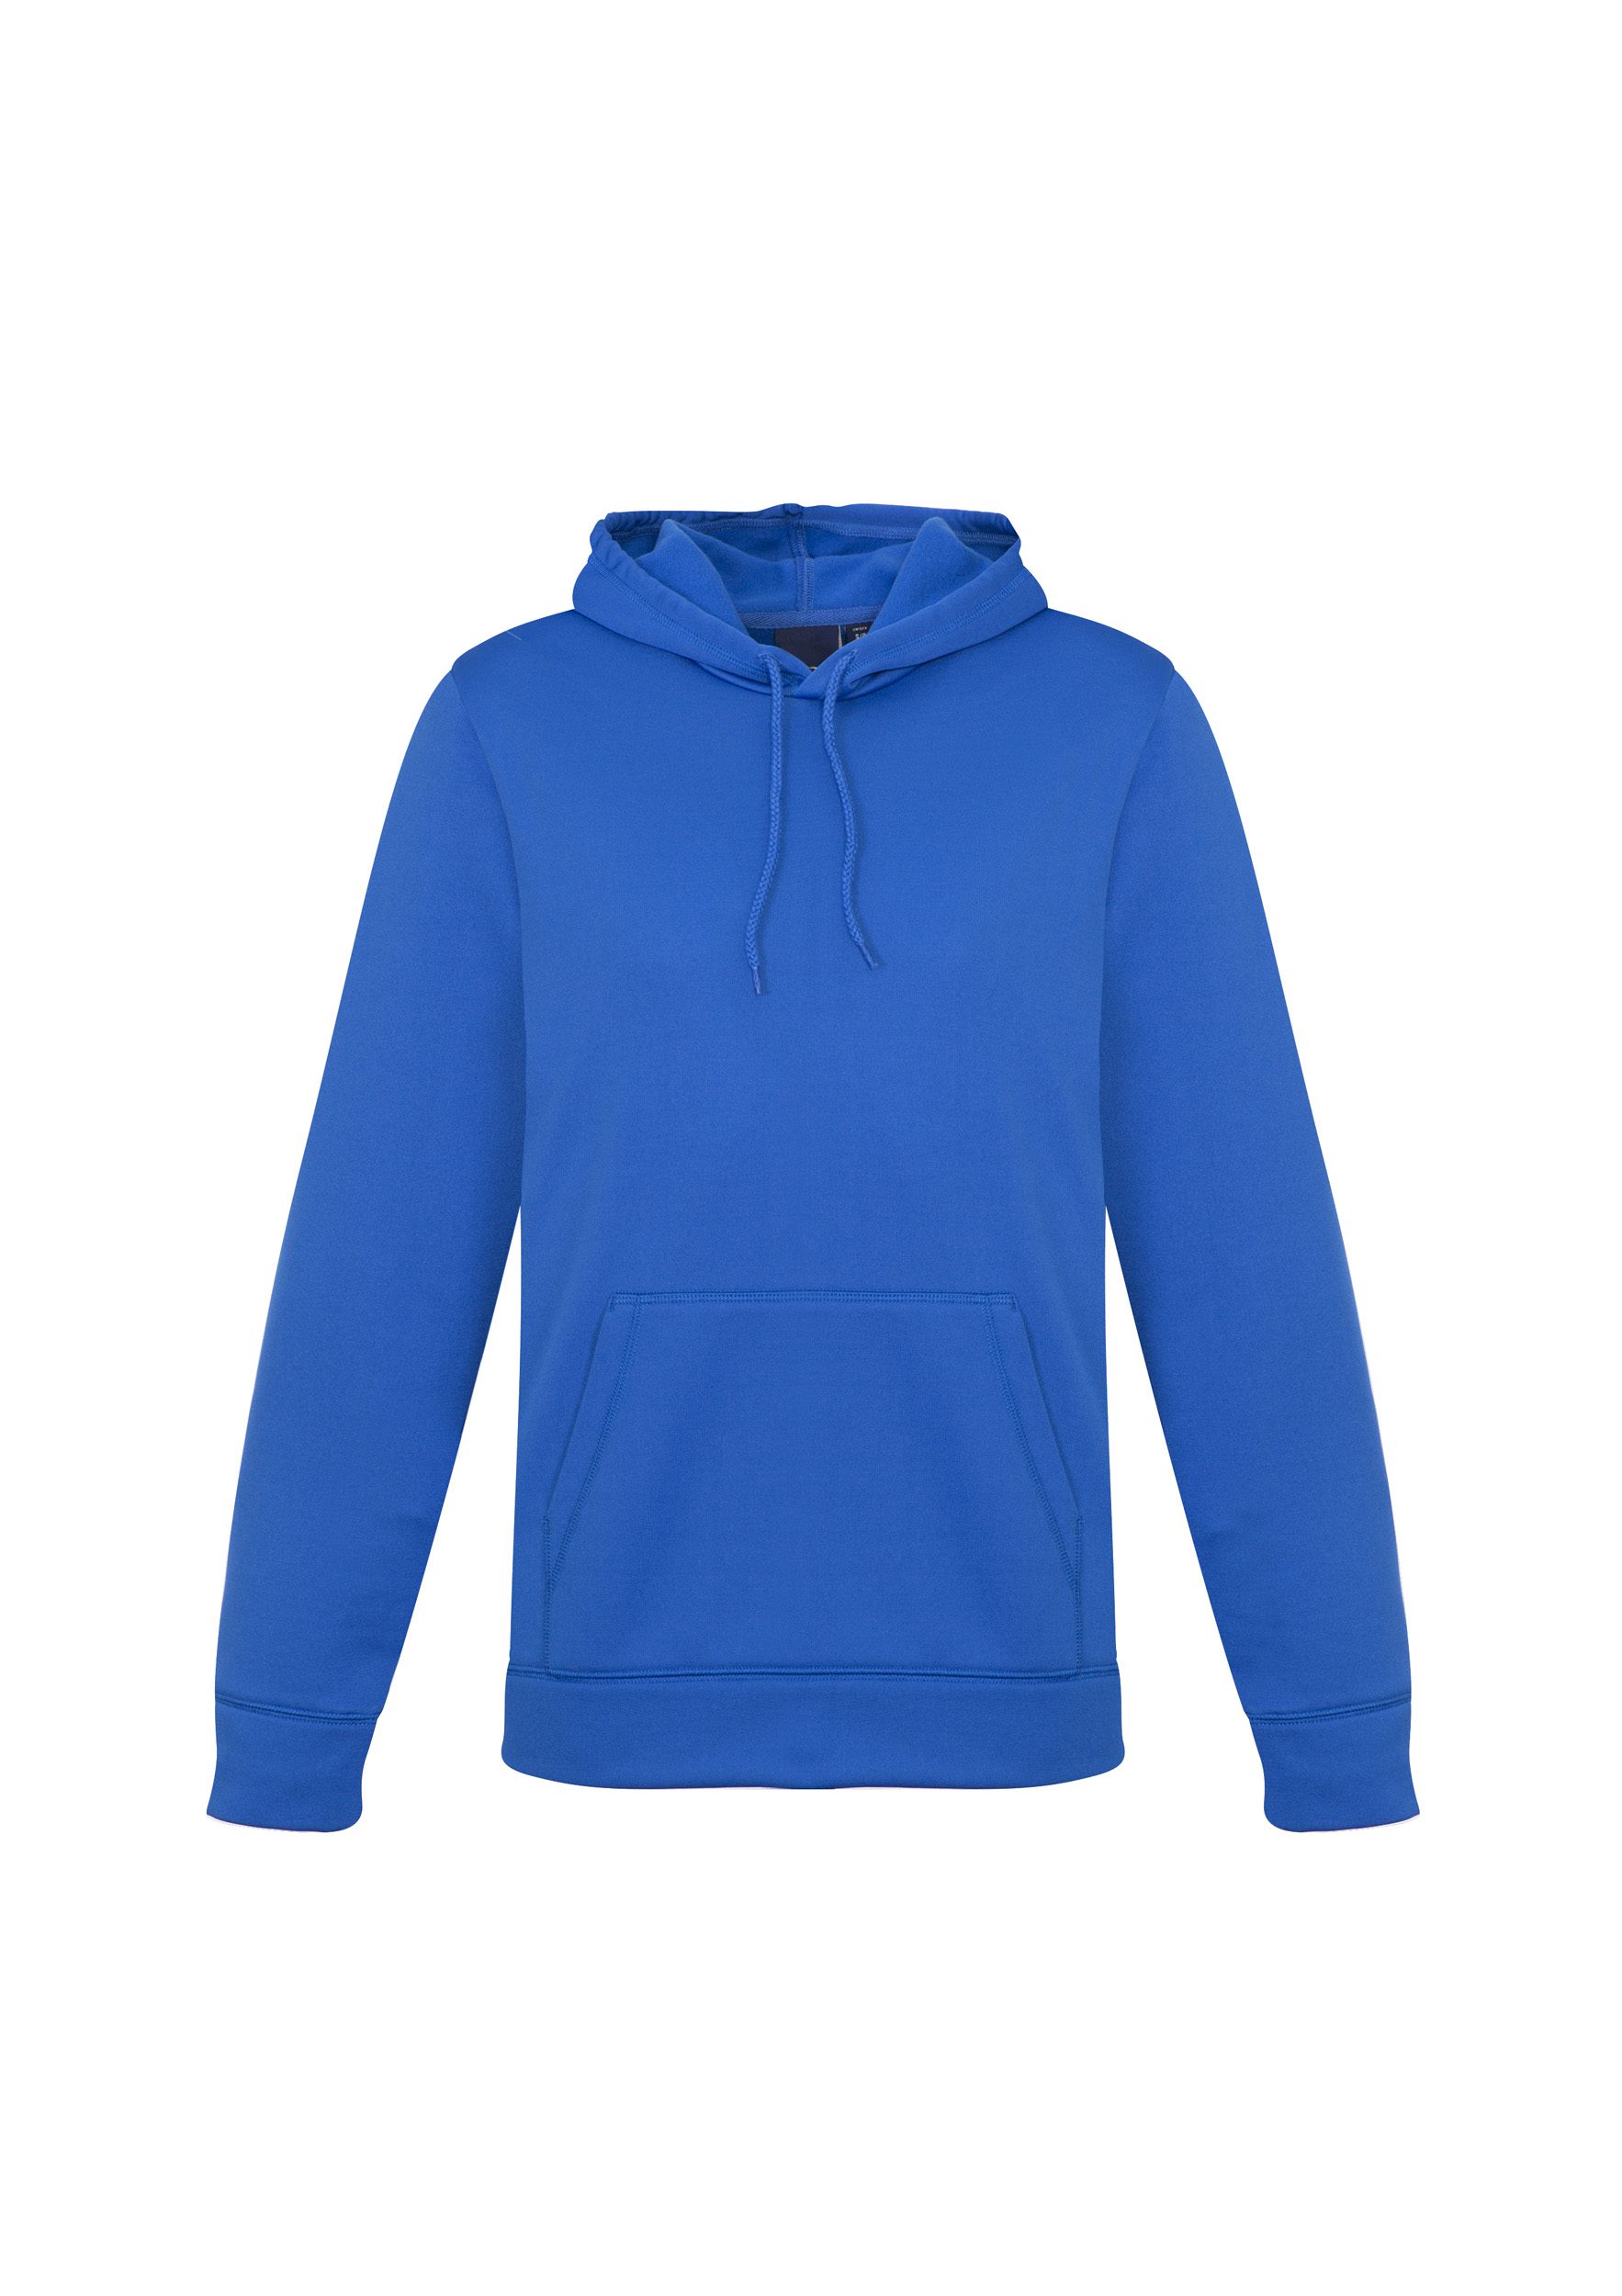 Biz Collection Ladies Hype Pull-On Hoodie #SW239LL Royal Blue